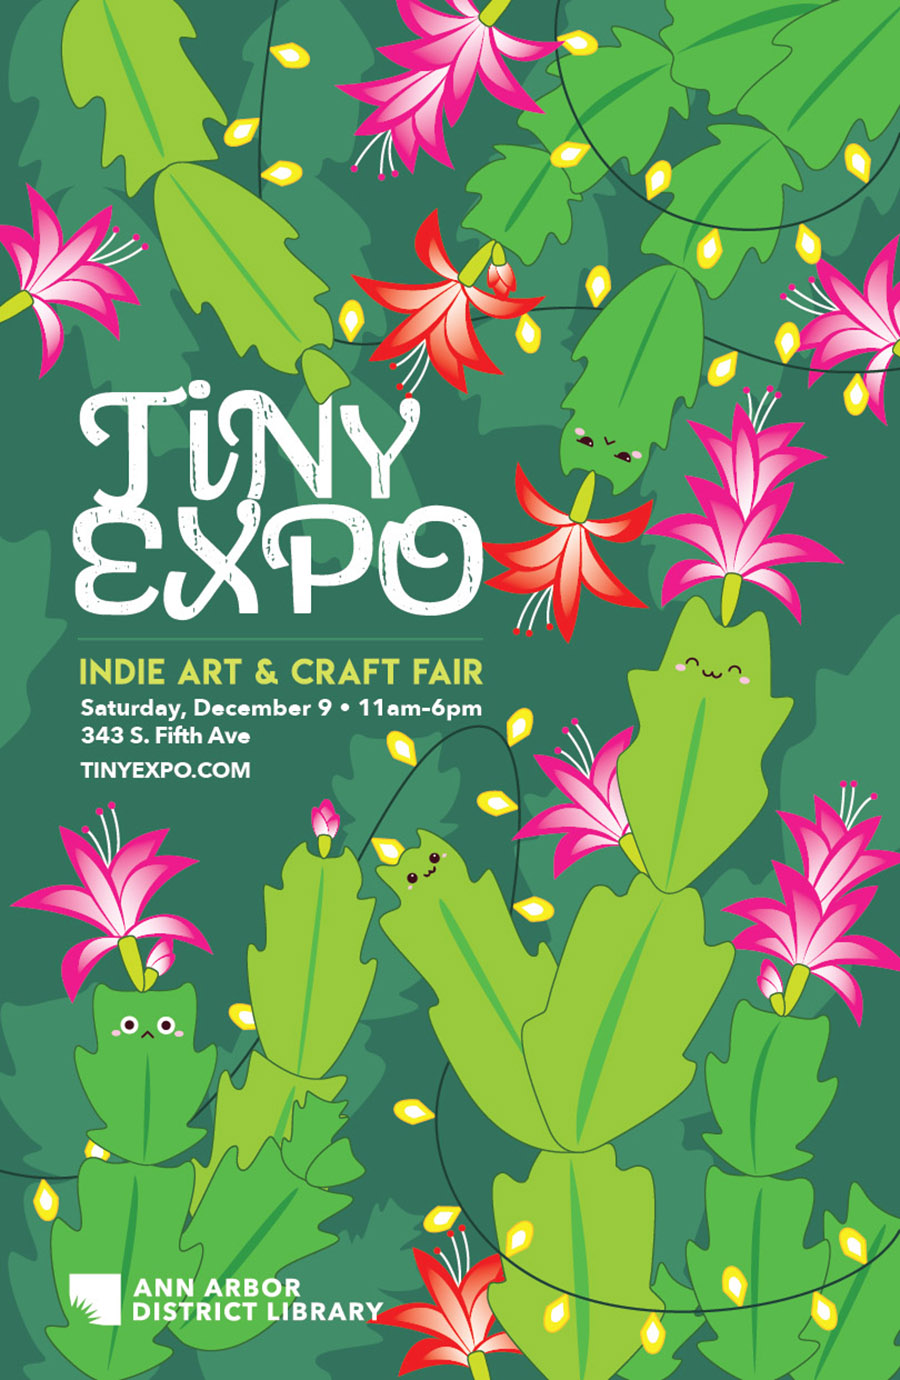 Ann Arbor District Library Tiny Expo event poster by Sophia Adalaine // freelance art and design commission